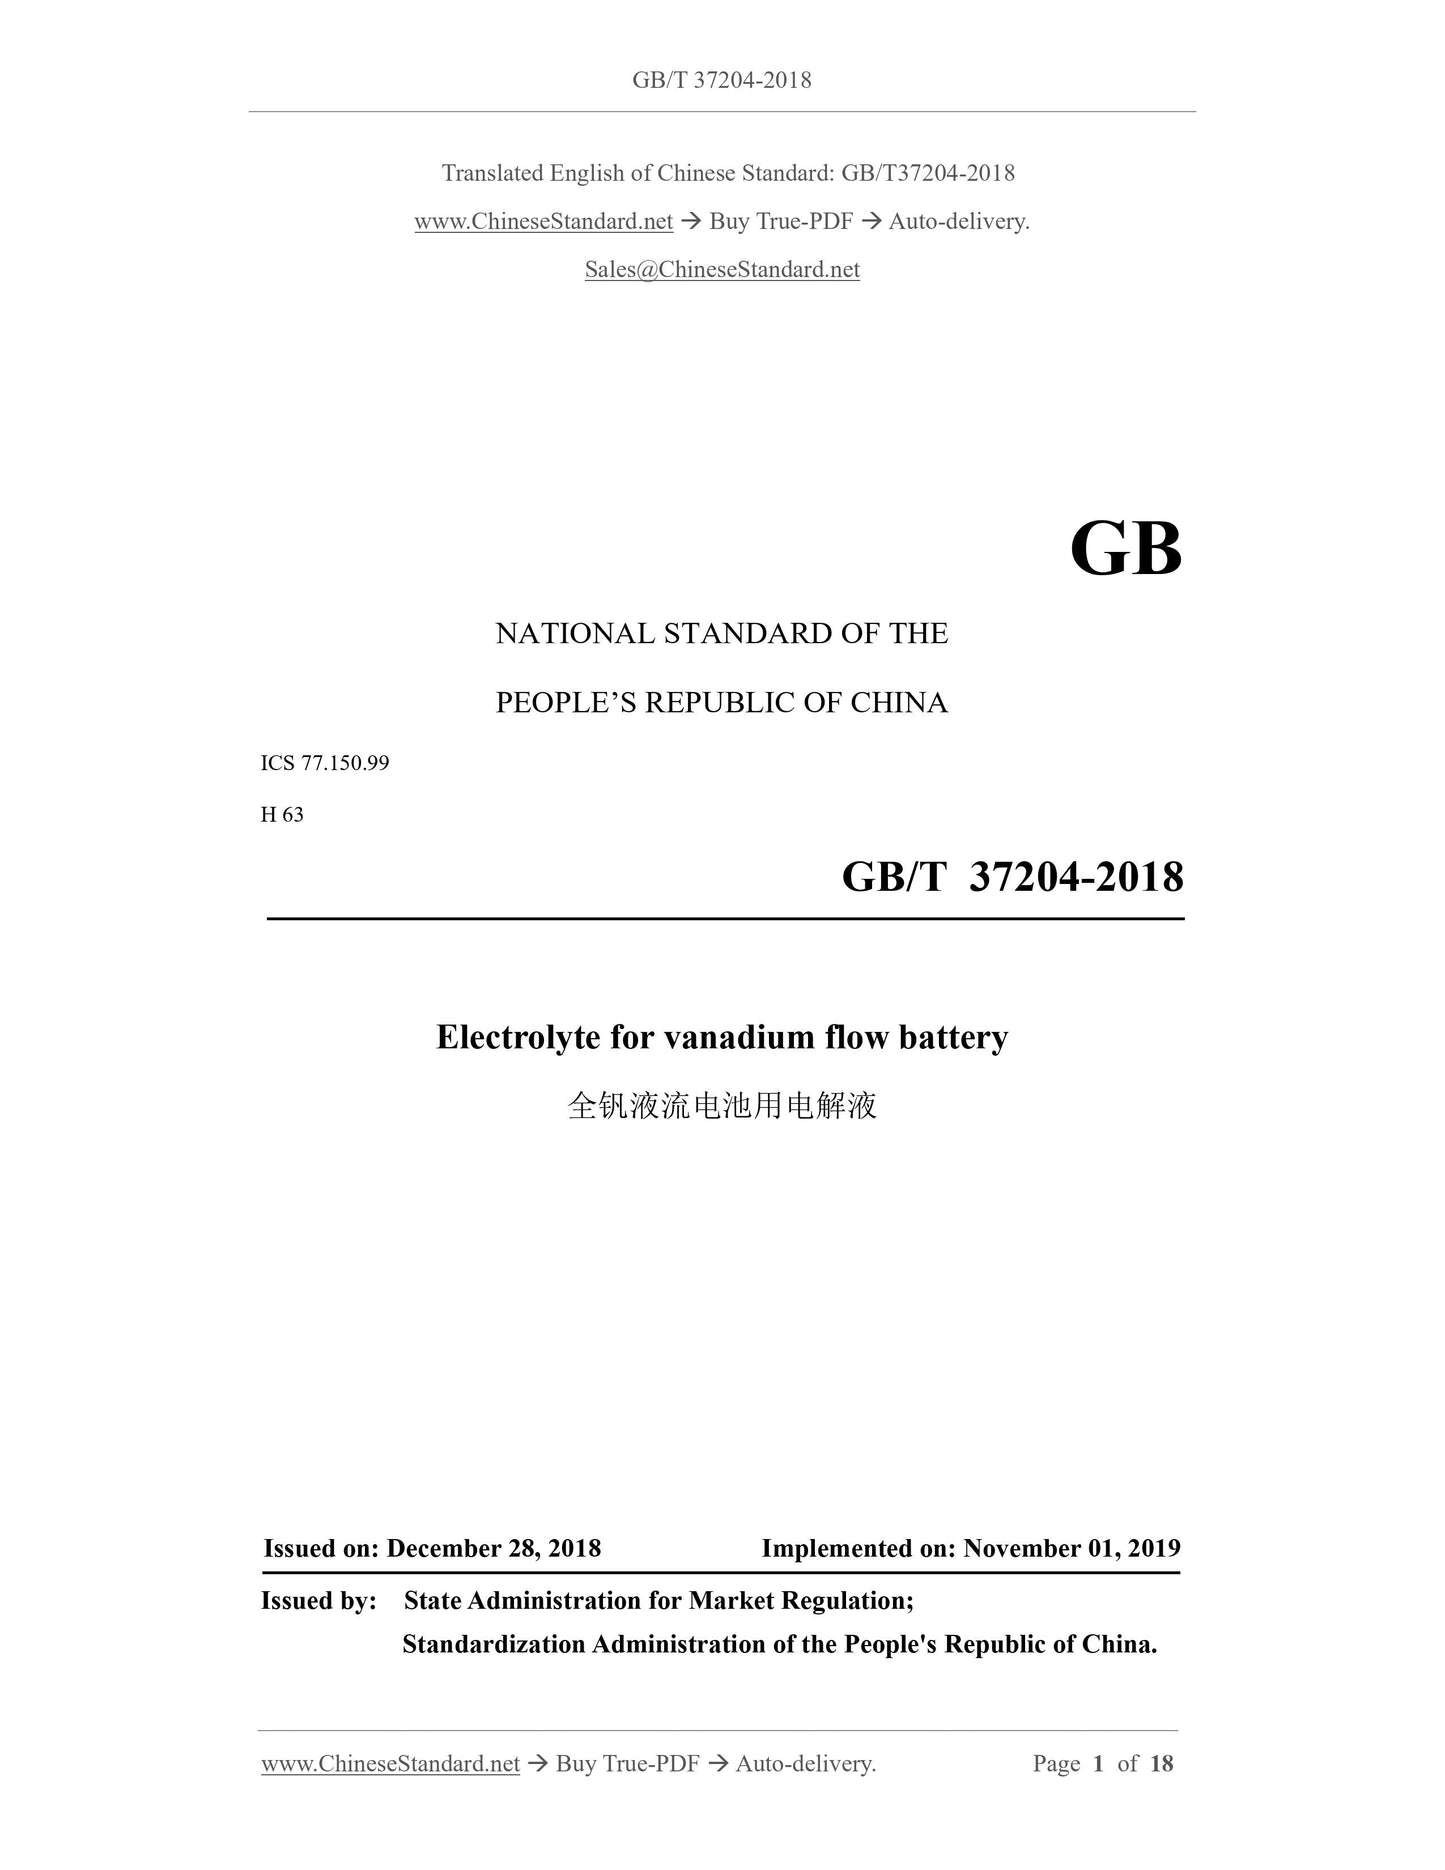 GB/T 37204-2018 Page 1